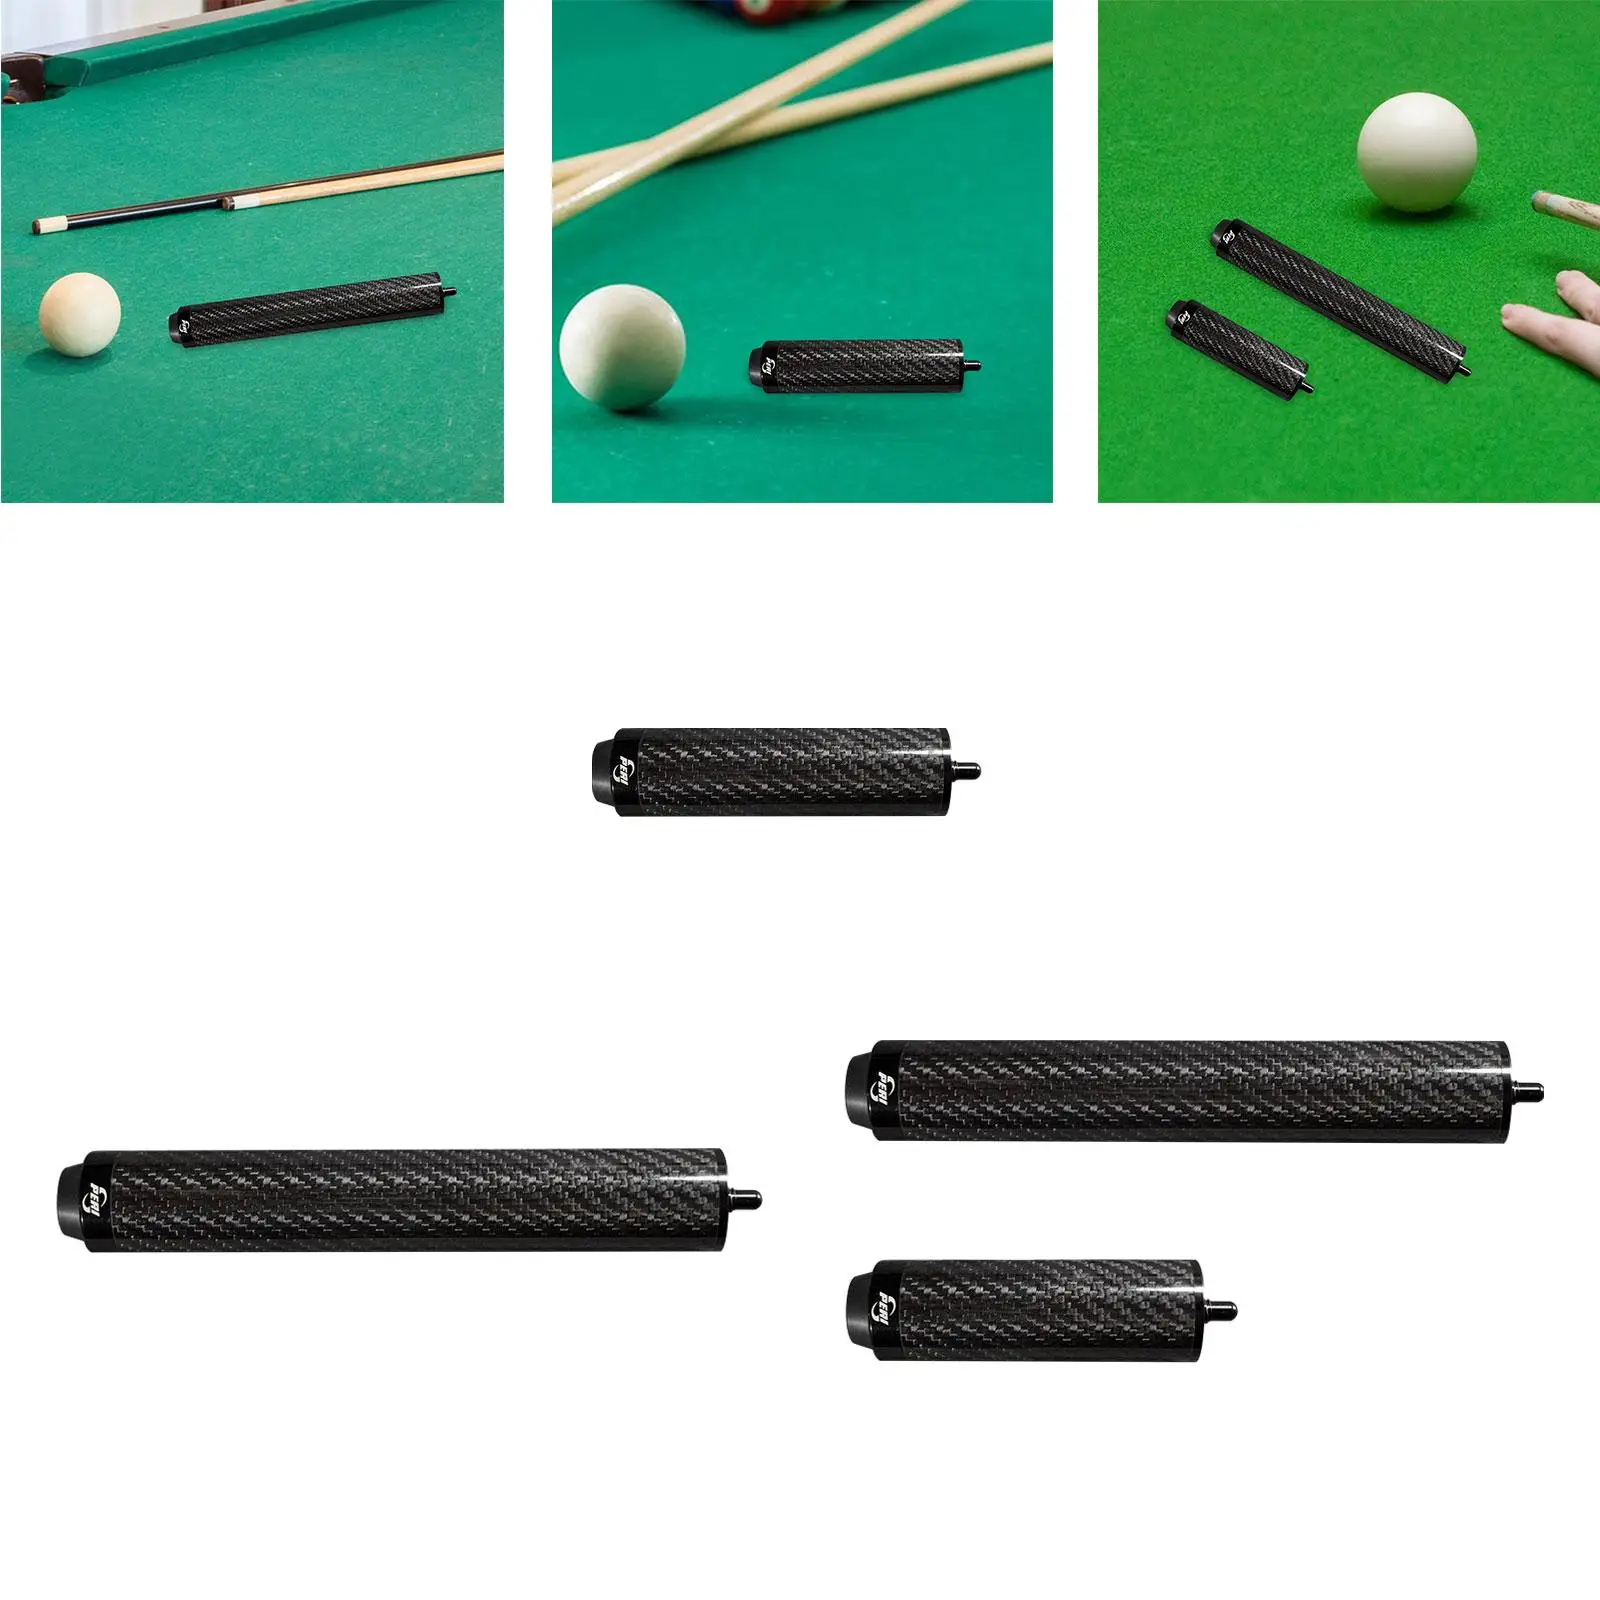 Billiards Pool Cue Extension, Cue Rod Extension, Weights Replacement Black Billiard Connect Shaft Snooker for Professional